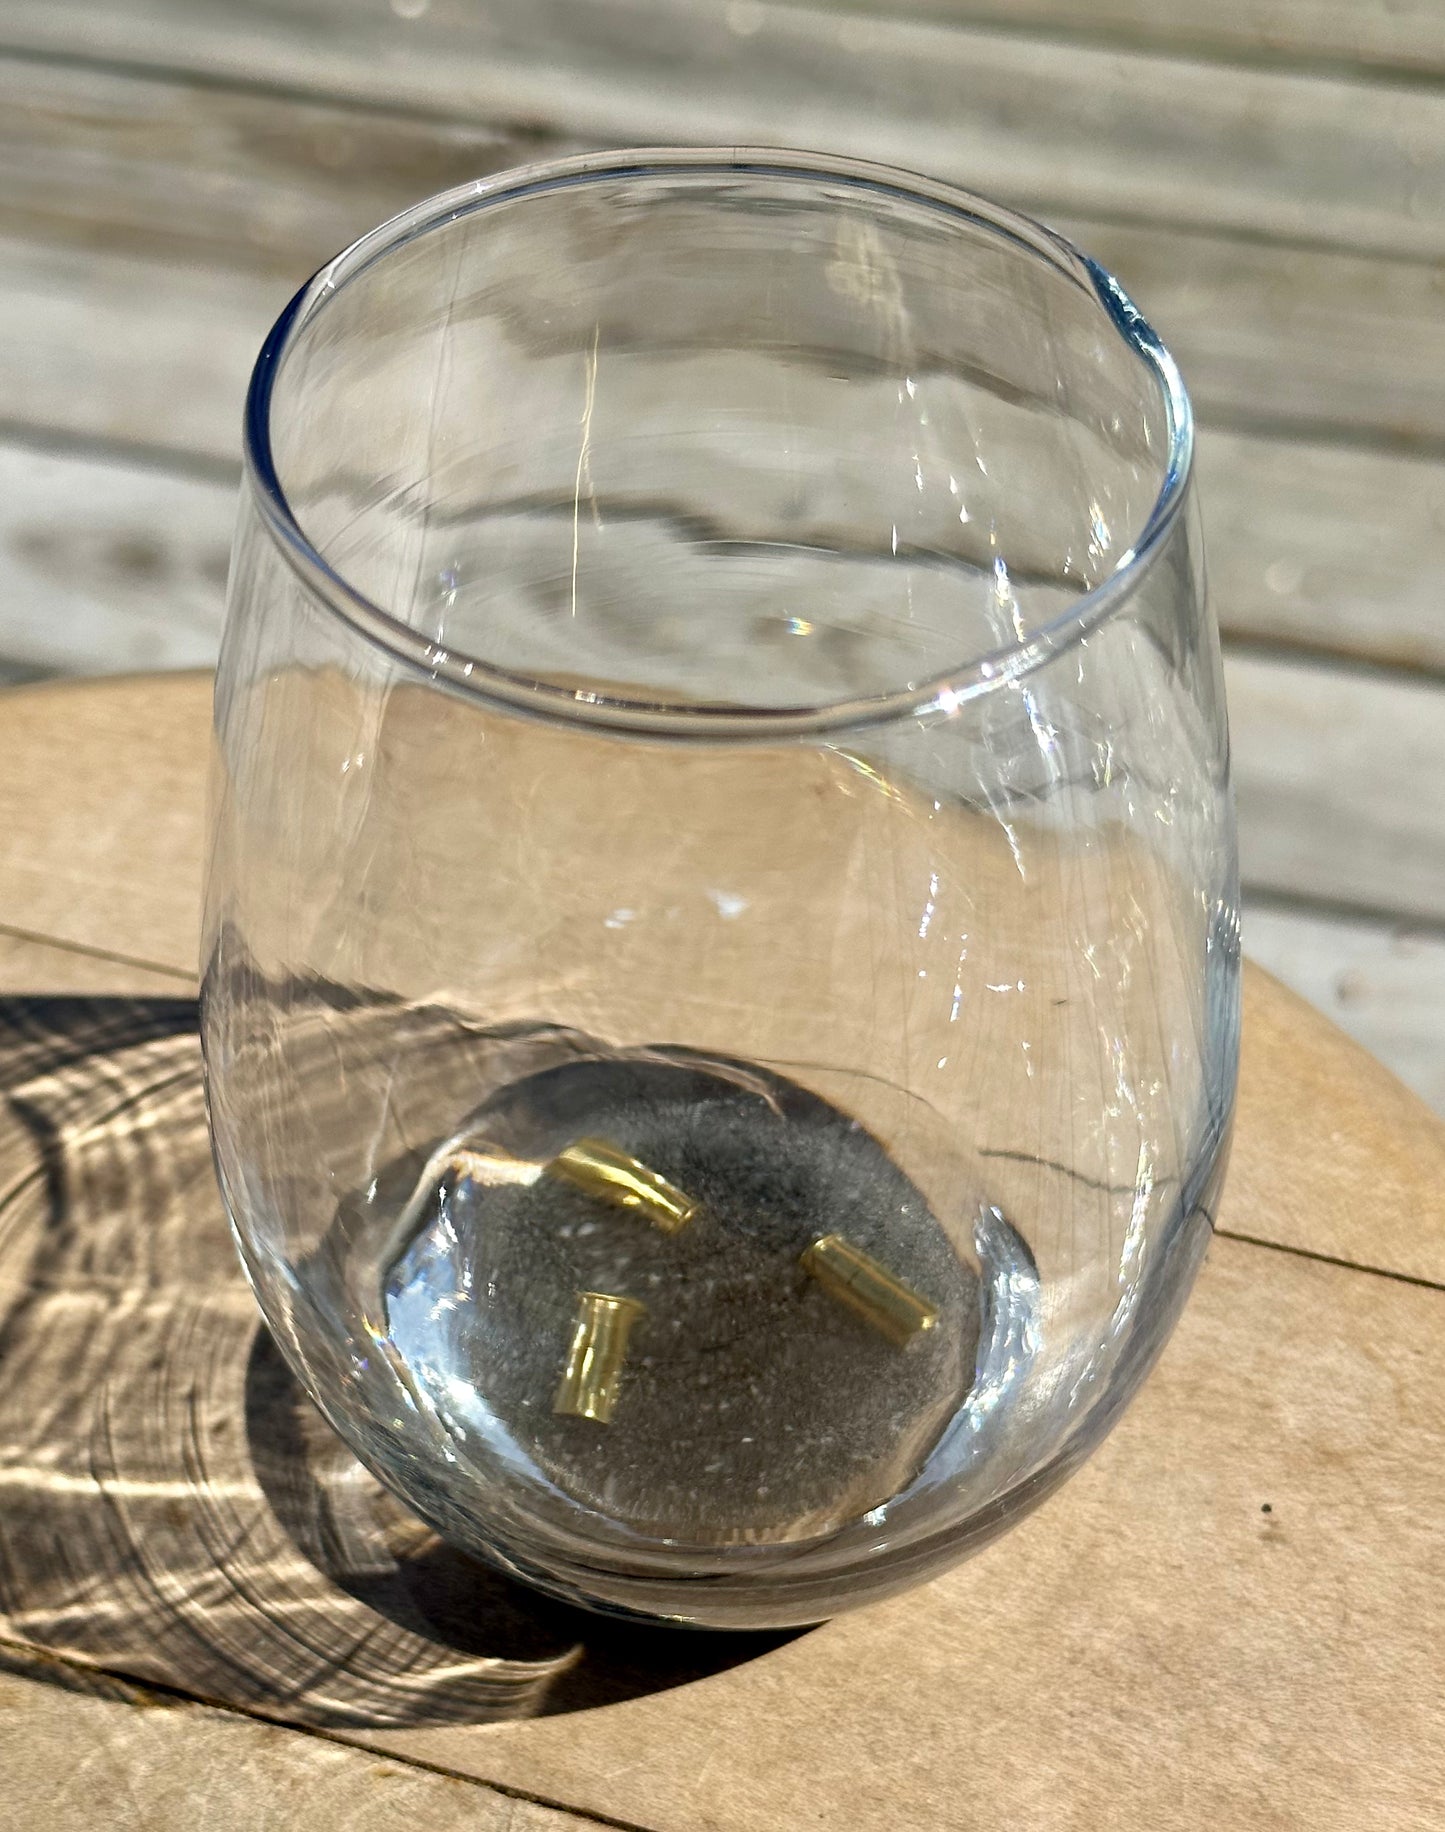 Black Sand with 22 shell casings Wine Glass